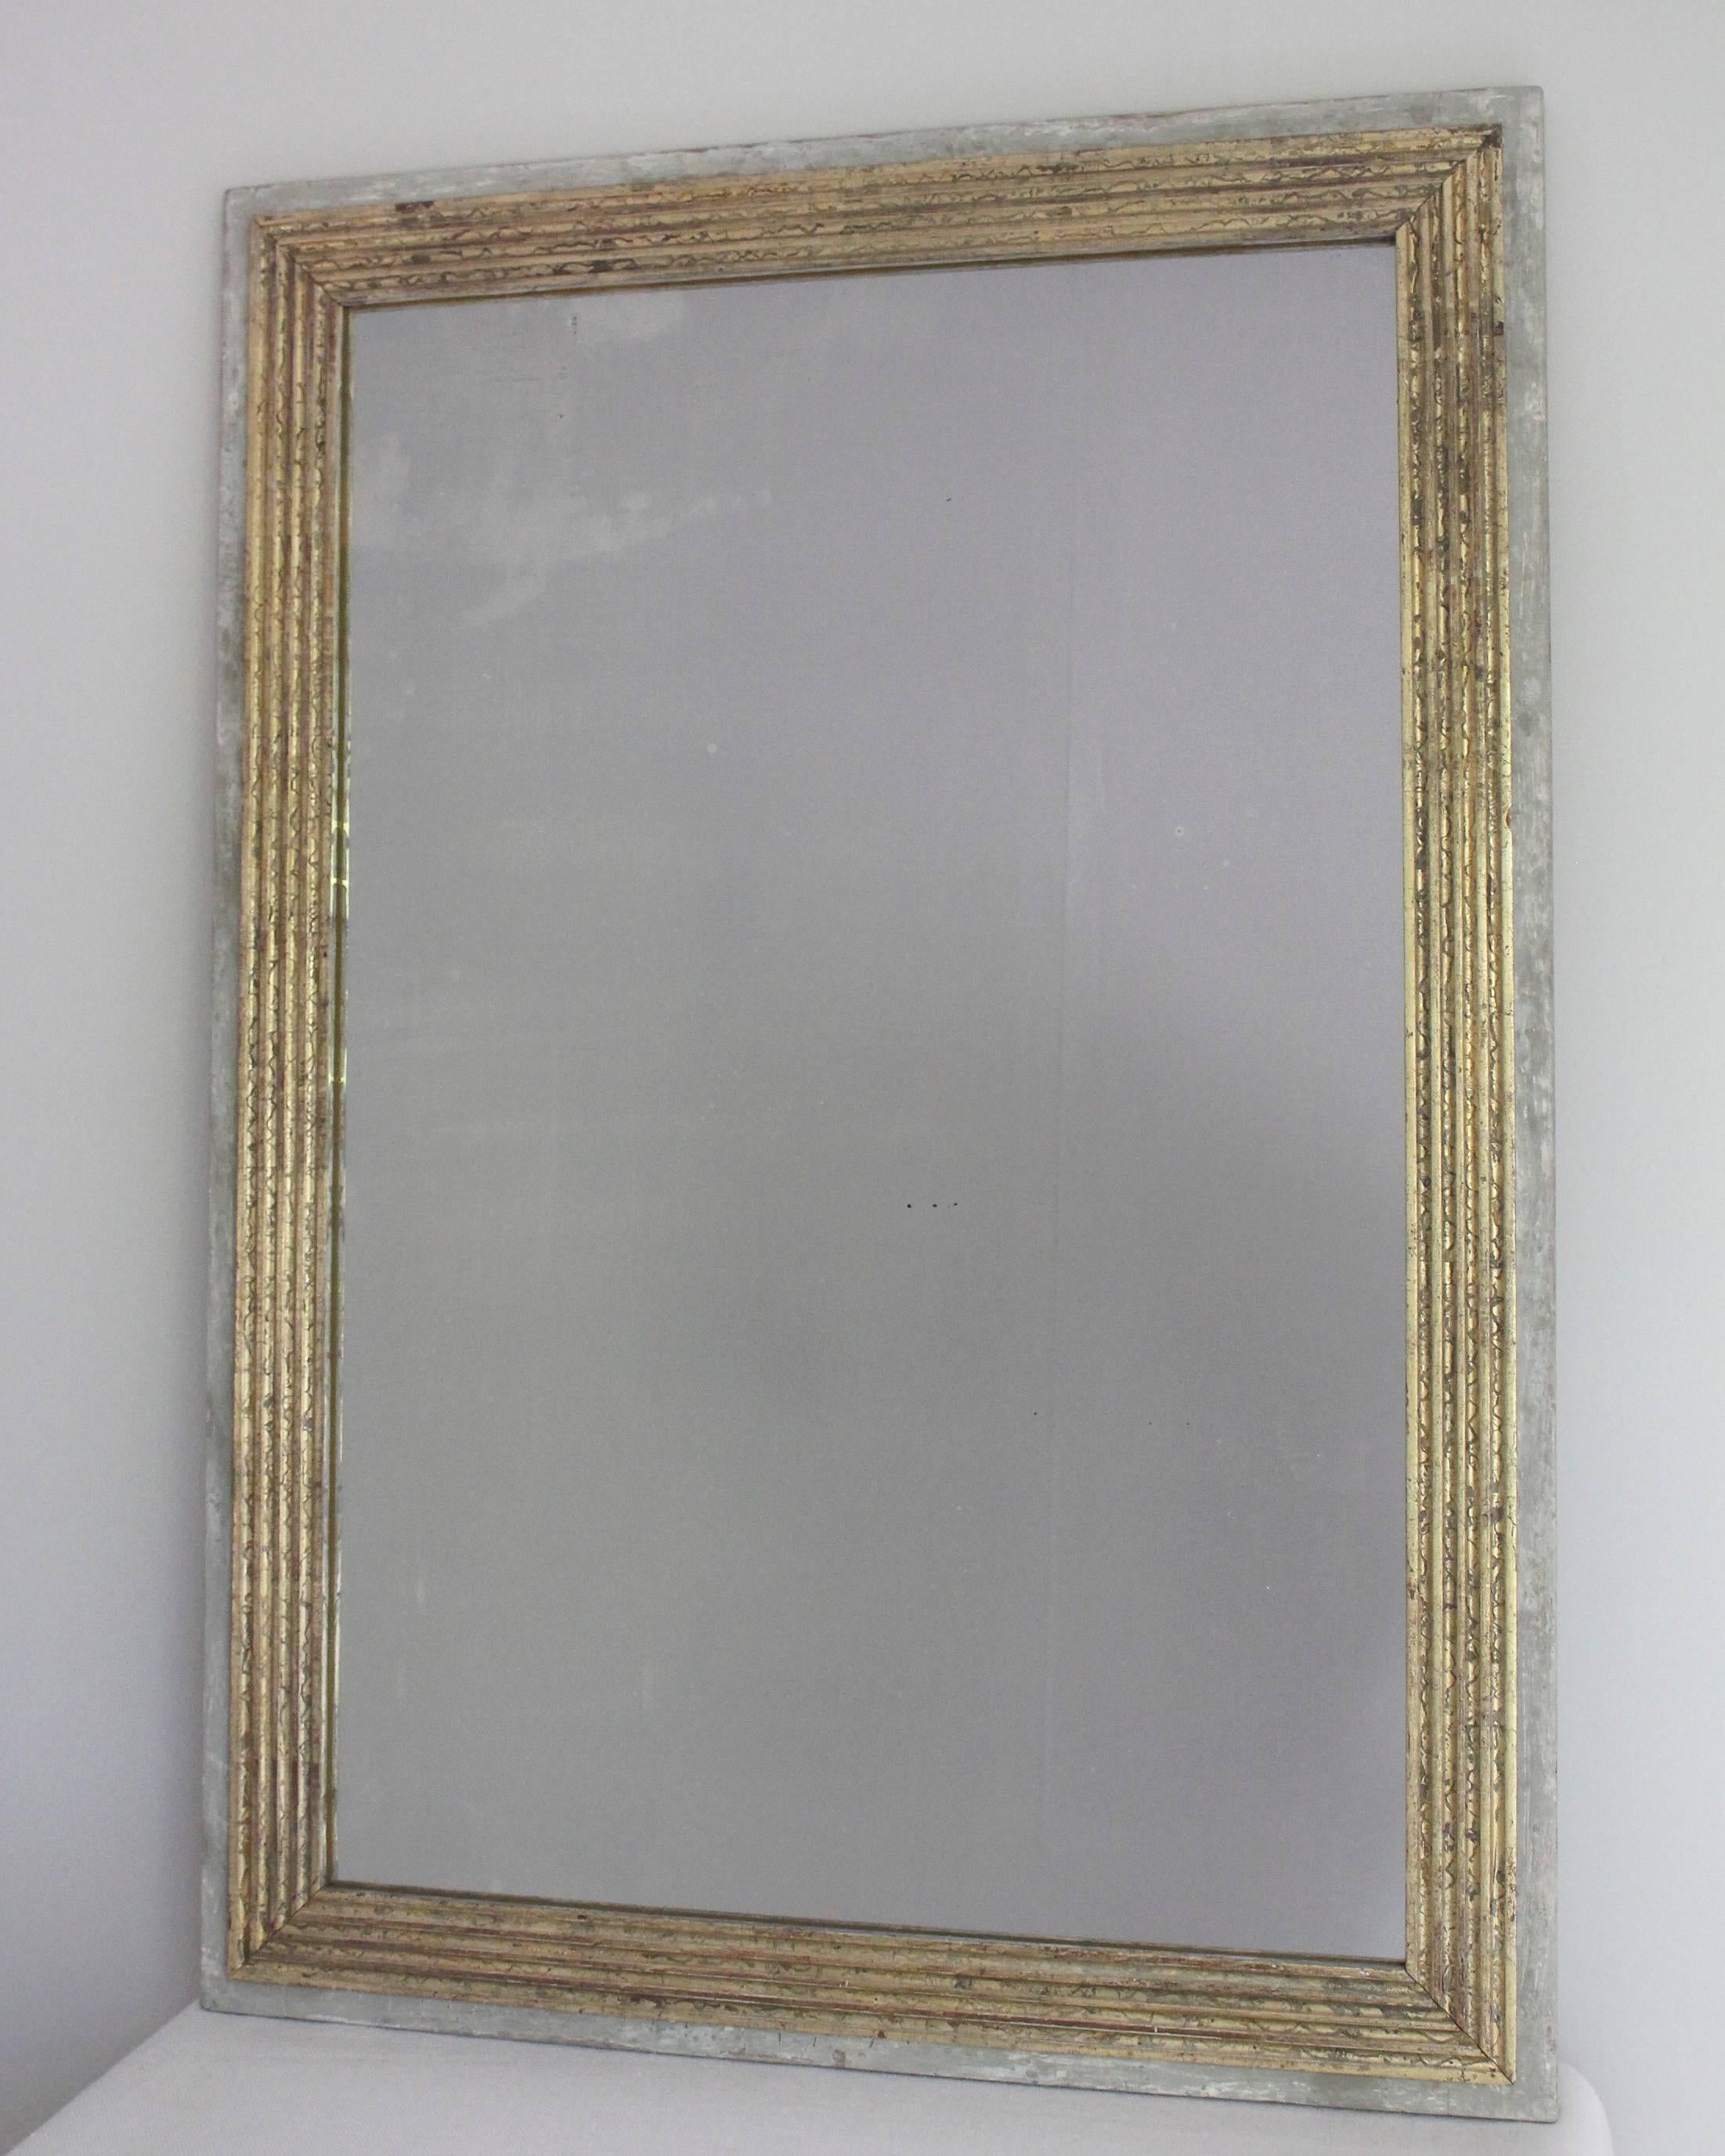 19th century Directoire style rectangular mirror with fluted giltwood surround mounted on painted base, with later gilt and paint.